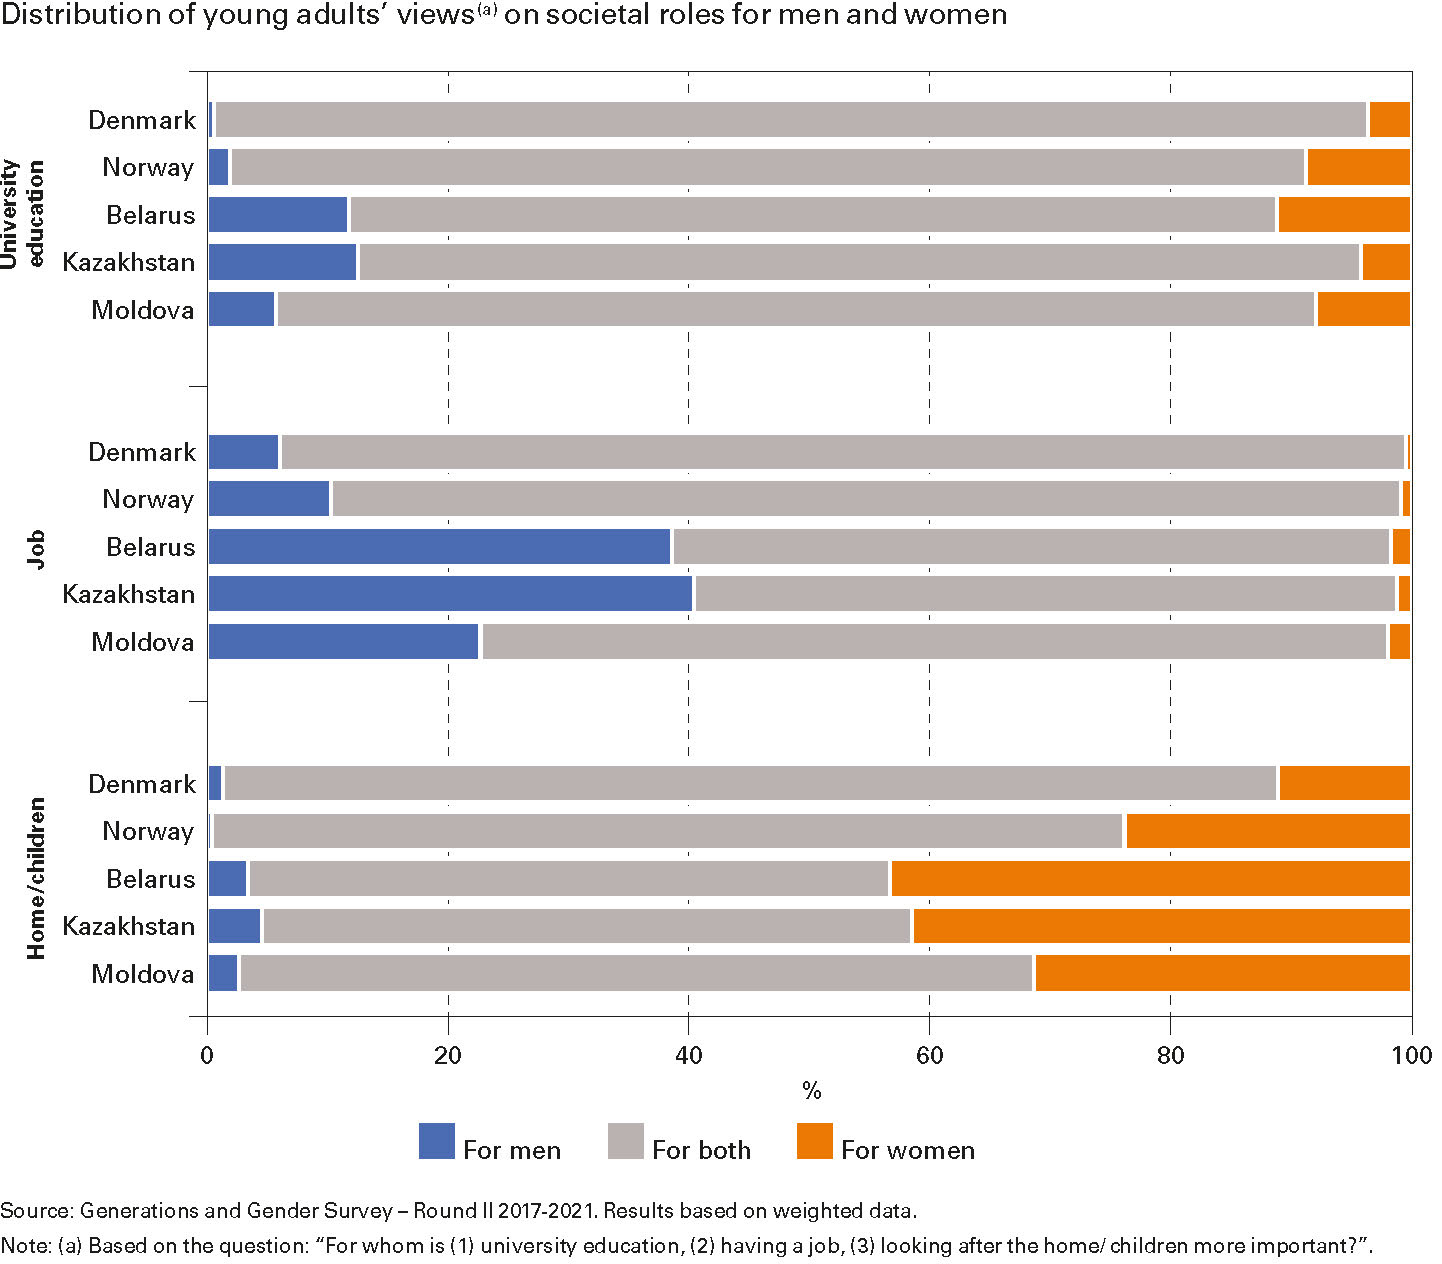 Distribution of young adults’ views on societal roles for men and women